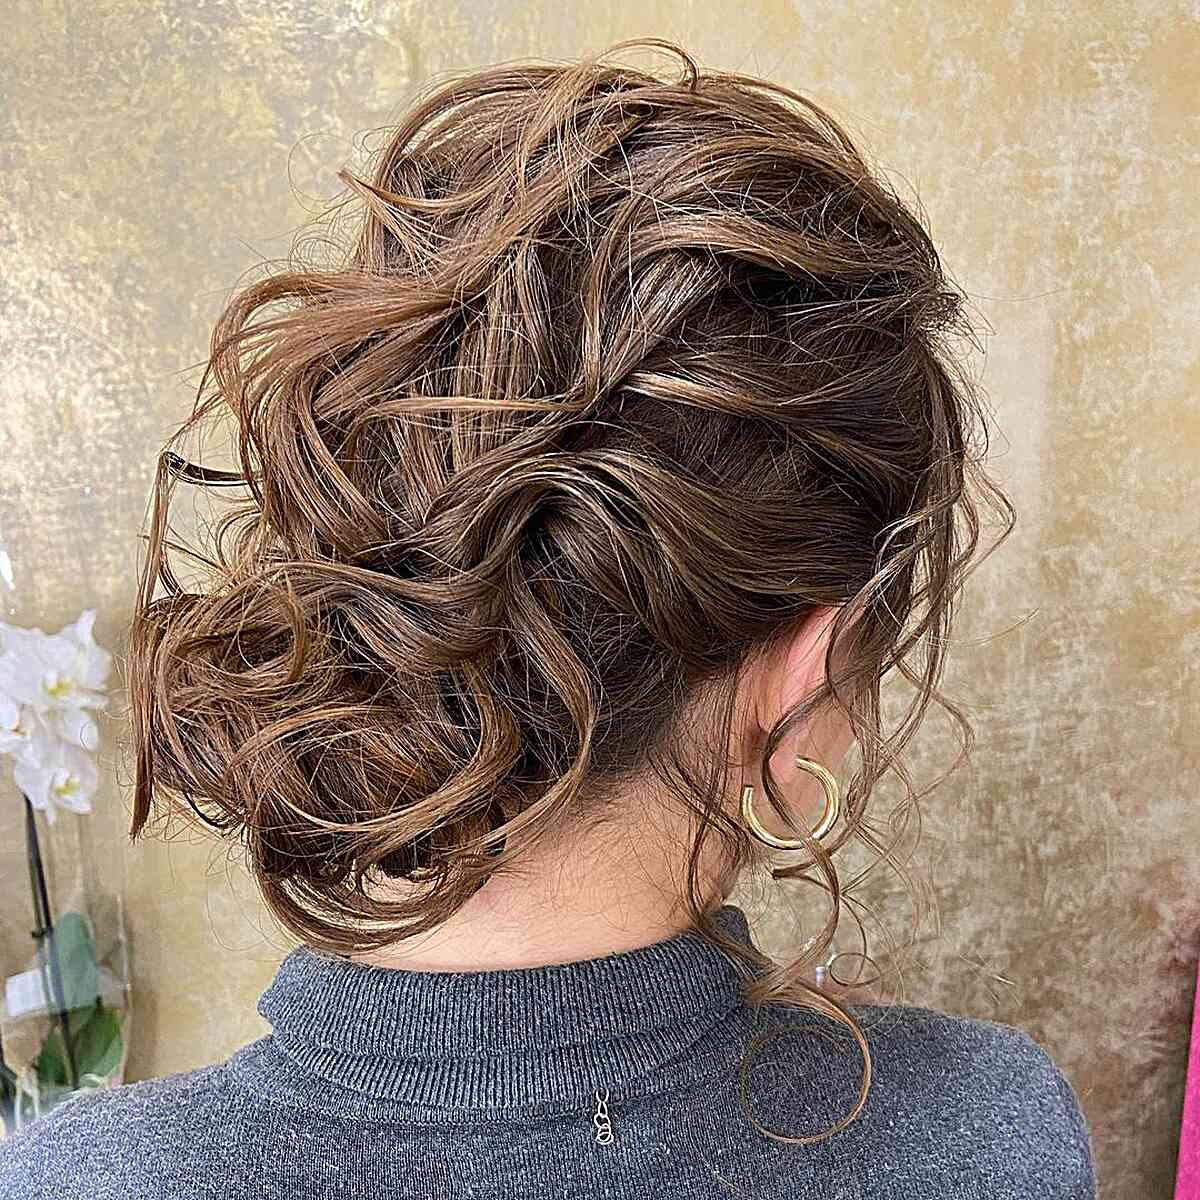 Medium-Length Messy Low Bun with Piece-y Waves for Prom